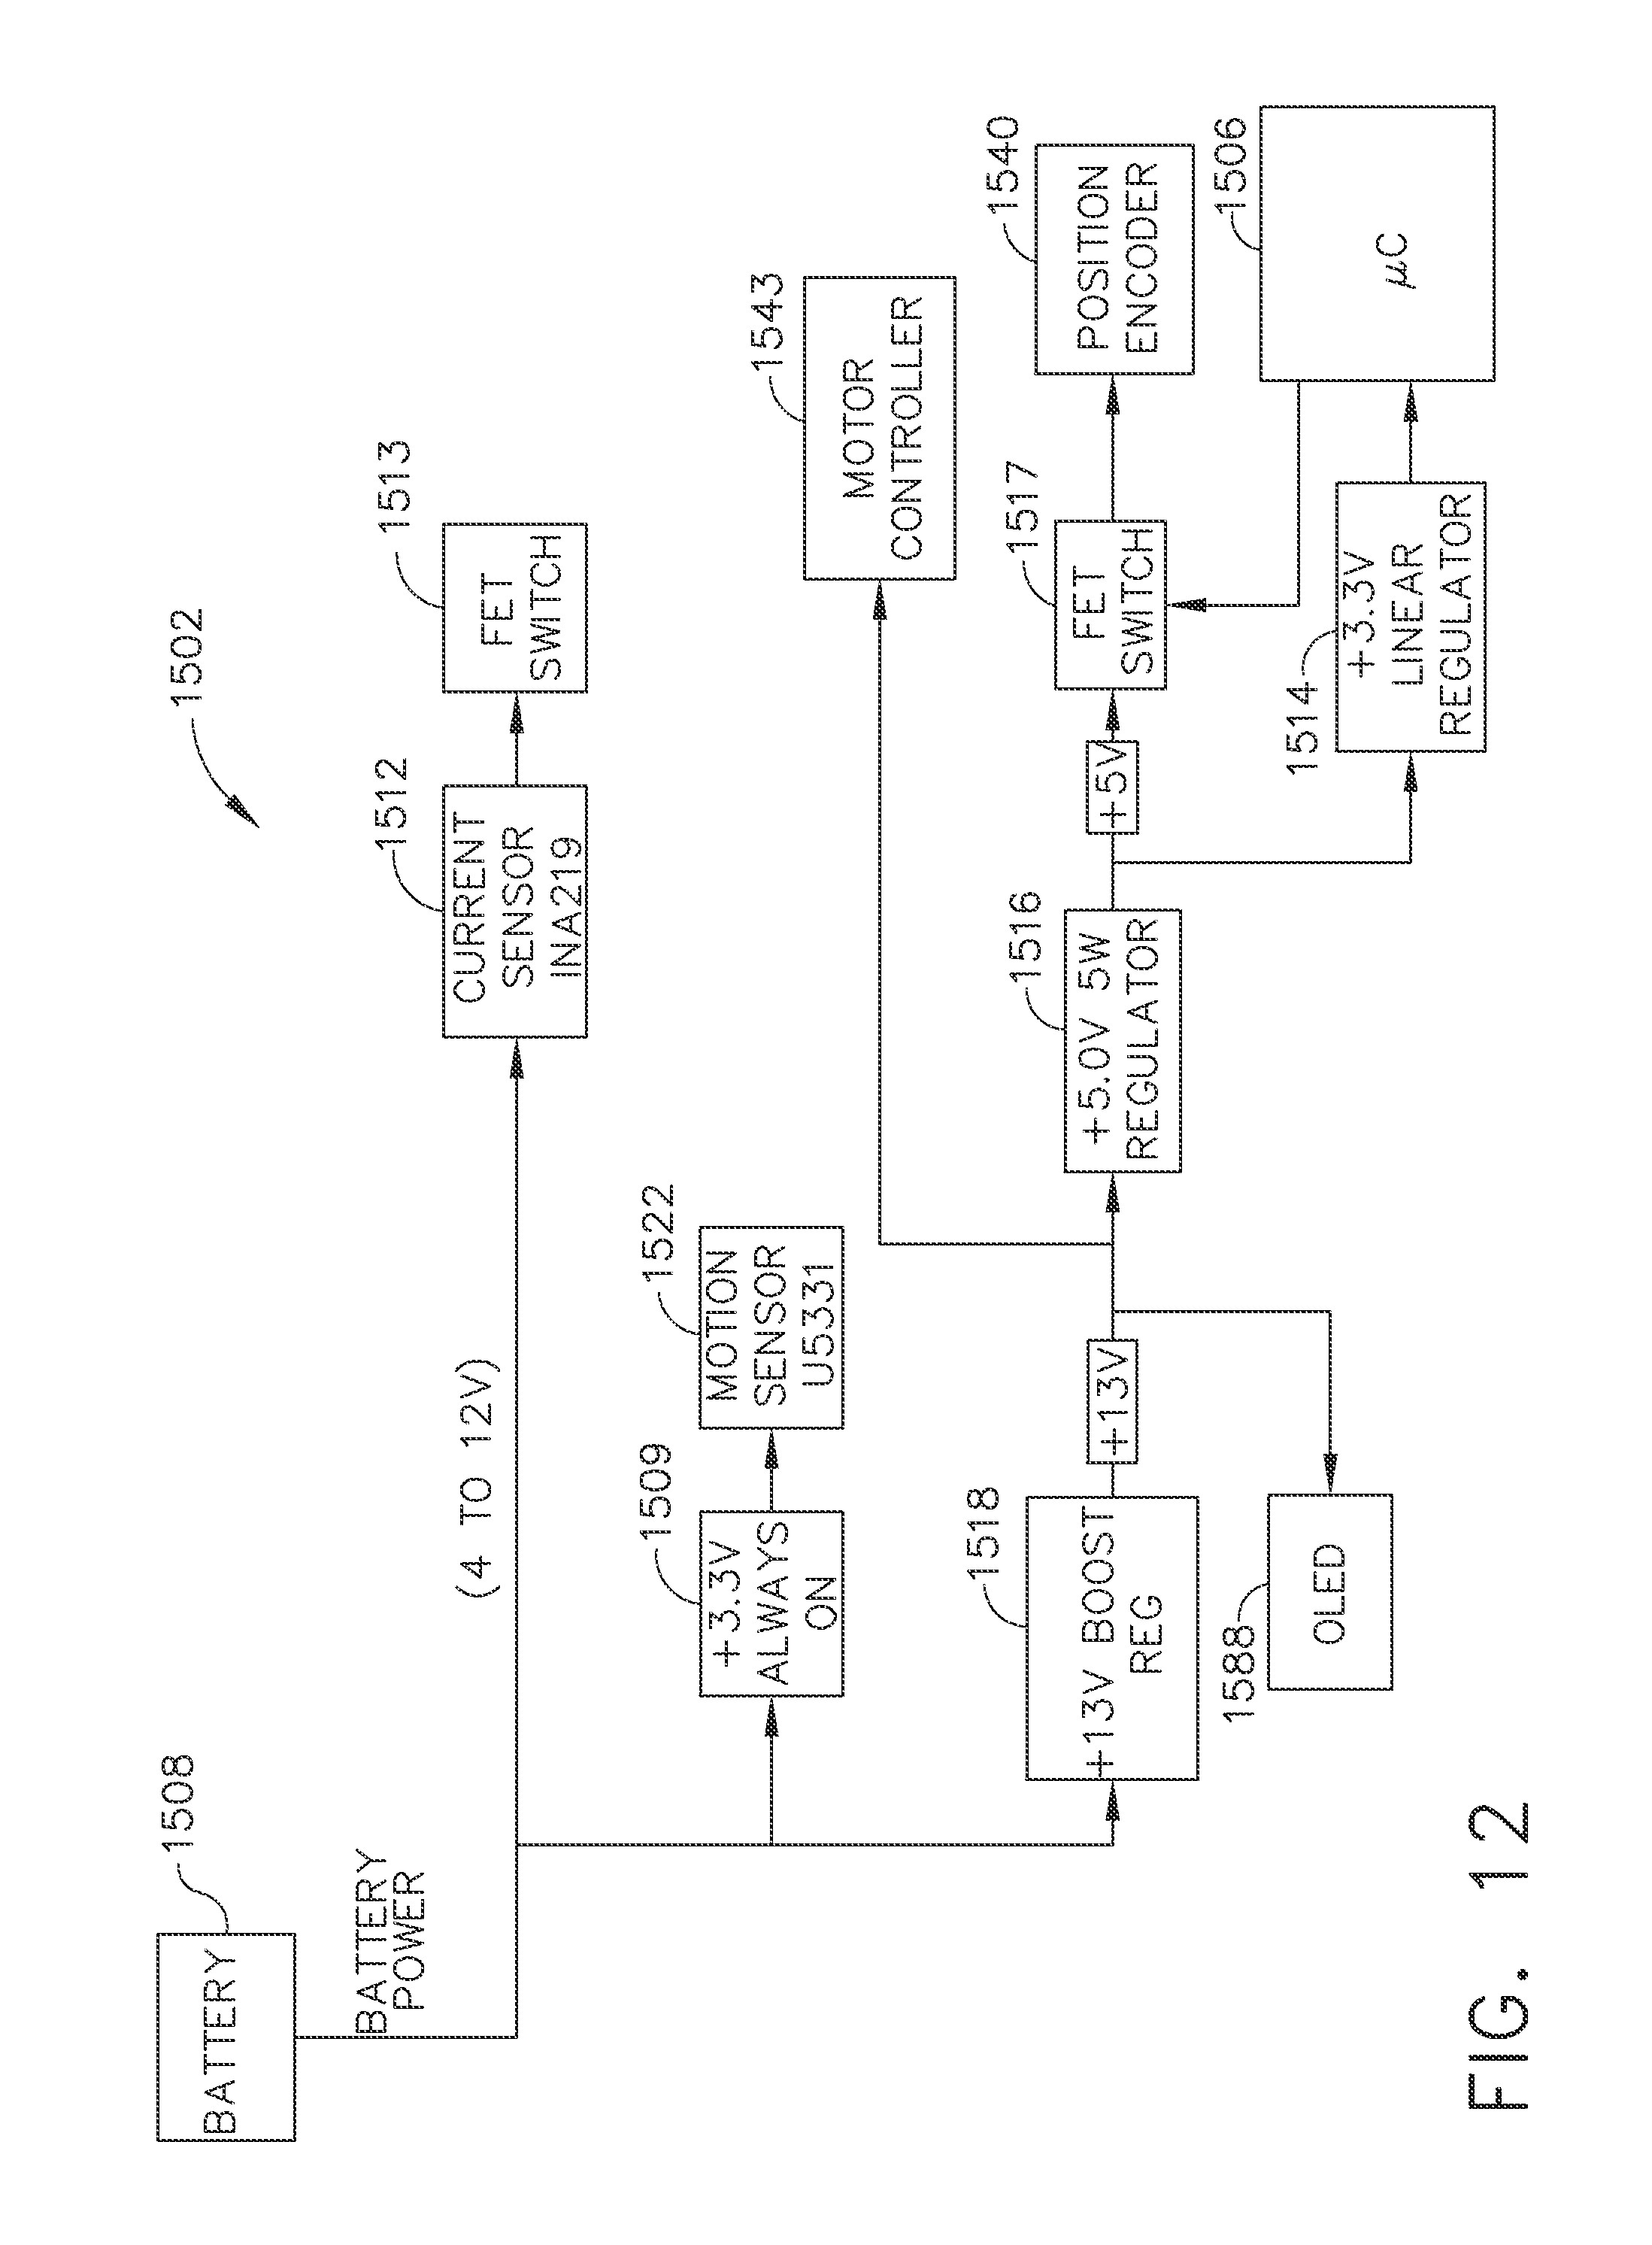 US A1 Power management through sleep options of segmented circuit and wake up control Google Patents